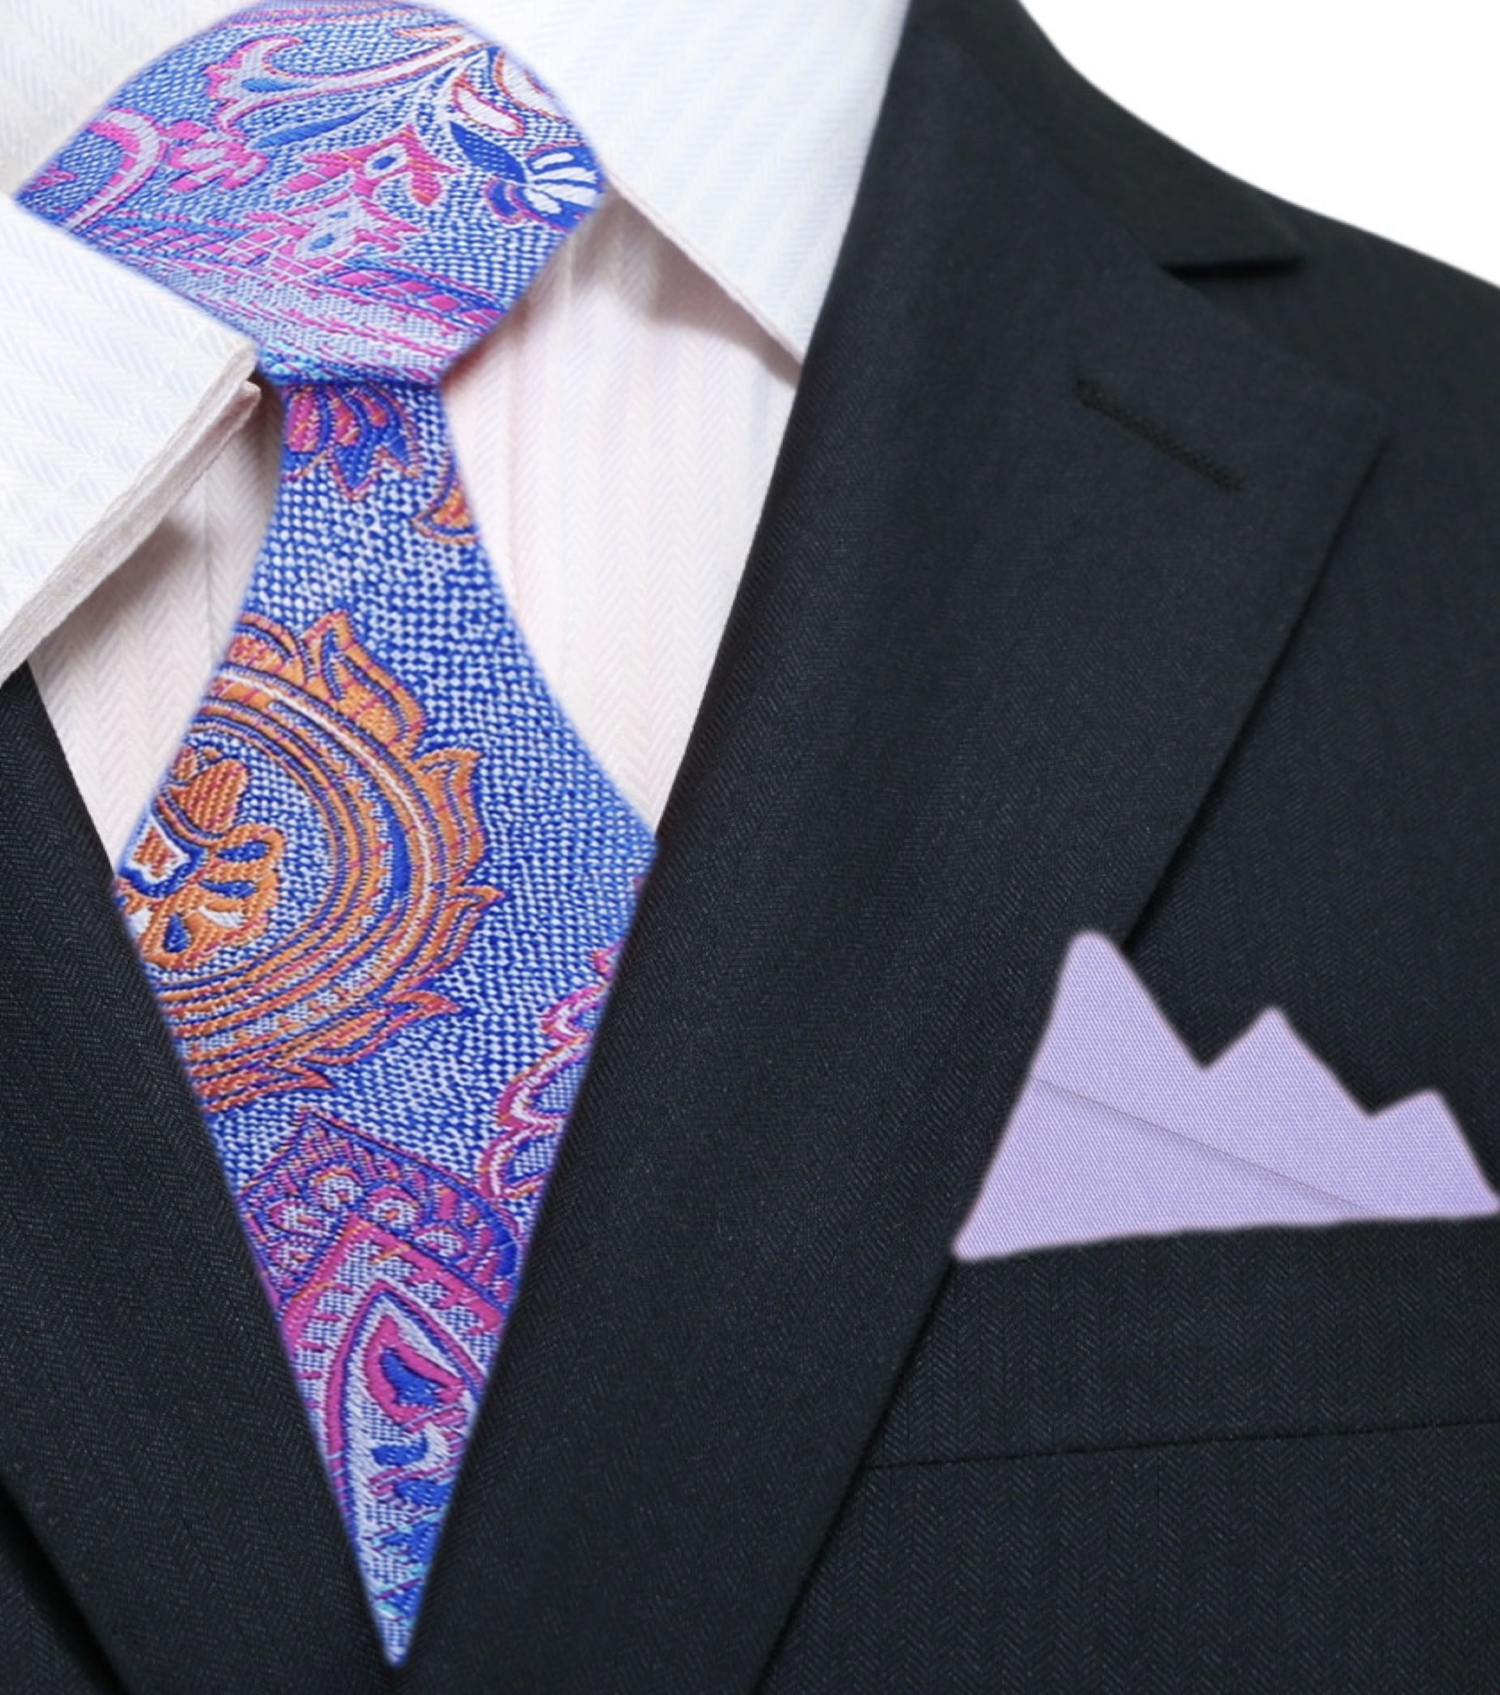 Main View: Blue, Pink Orange Paisley Silk Tie and Accenting Light Purple Pocket Square